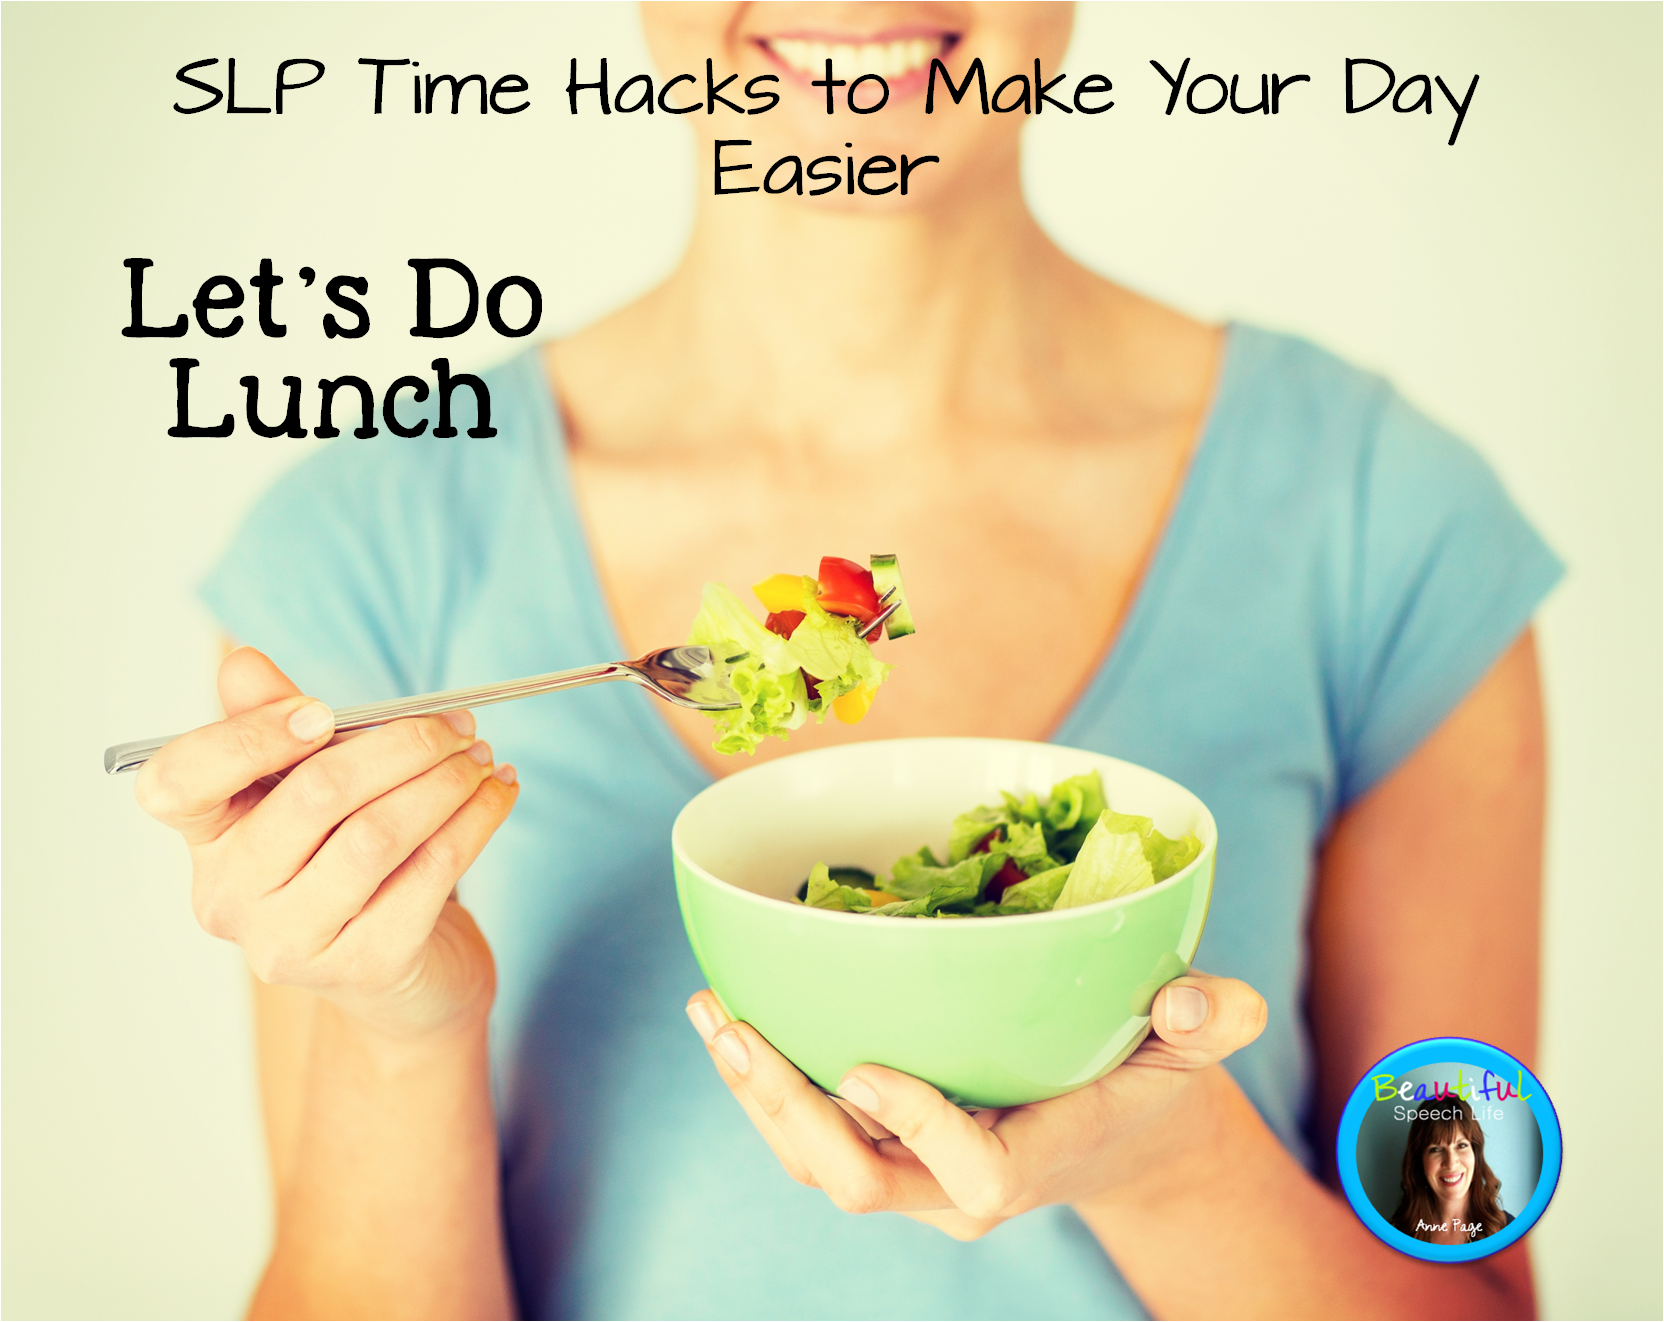 SLP Time Hacks to Make Your Day Easier: Let’s Do Lunch